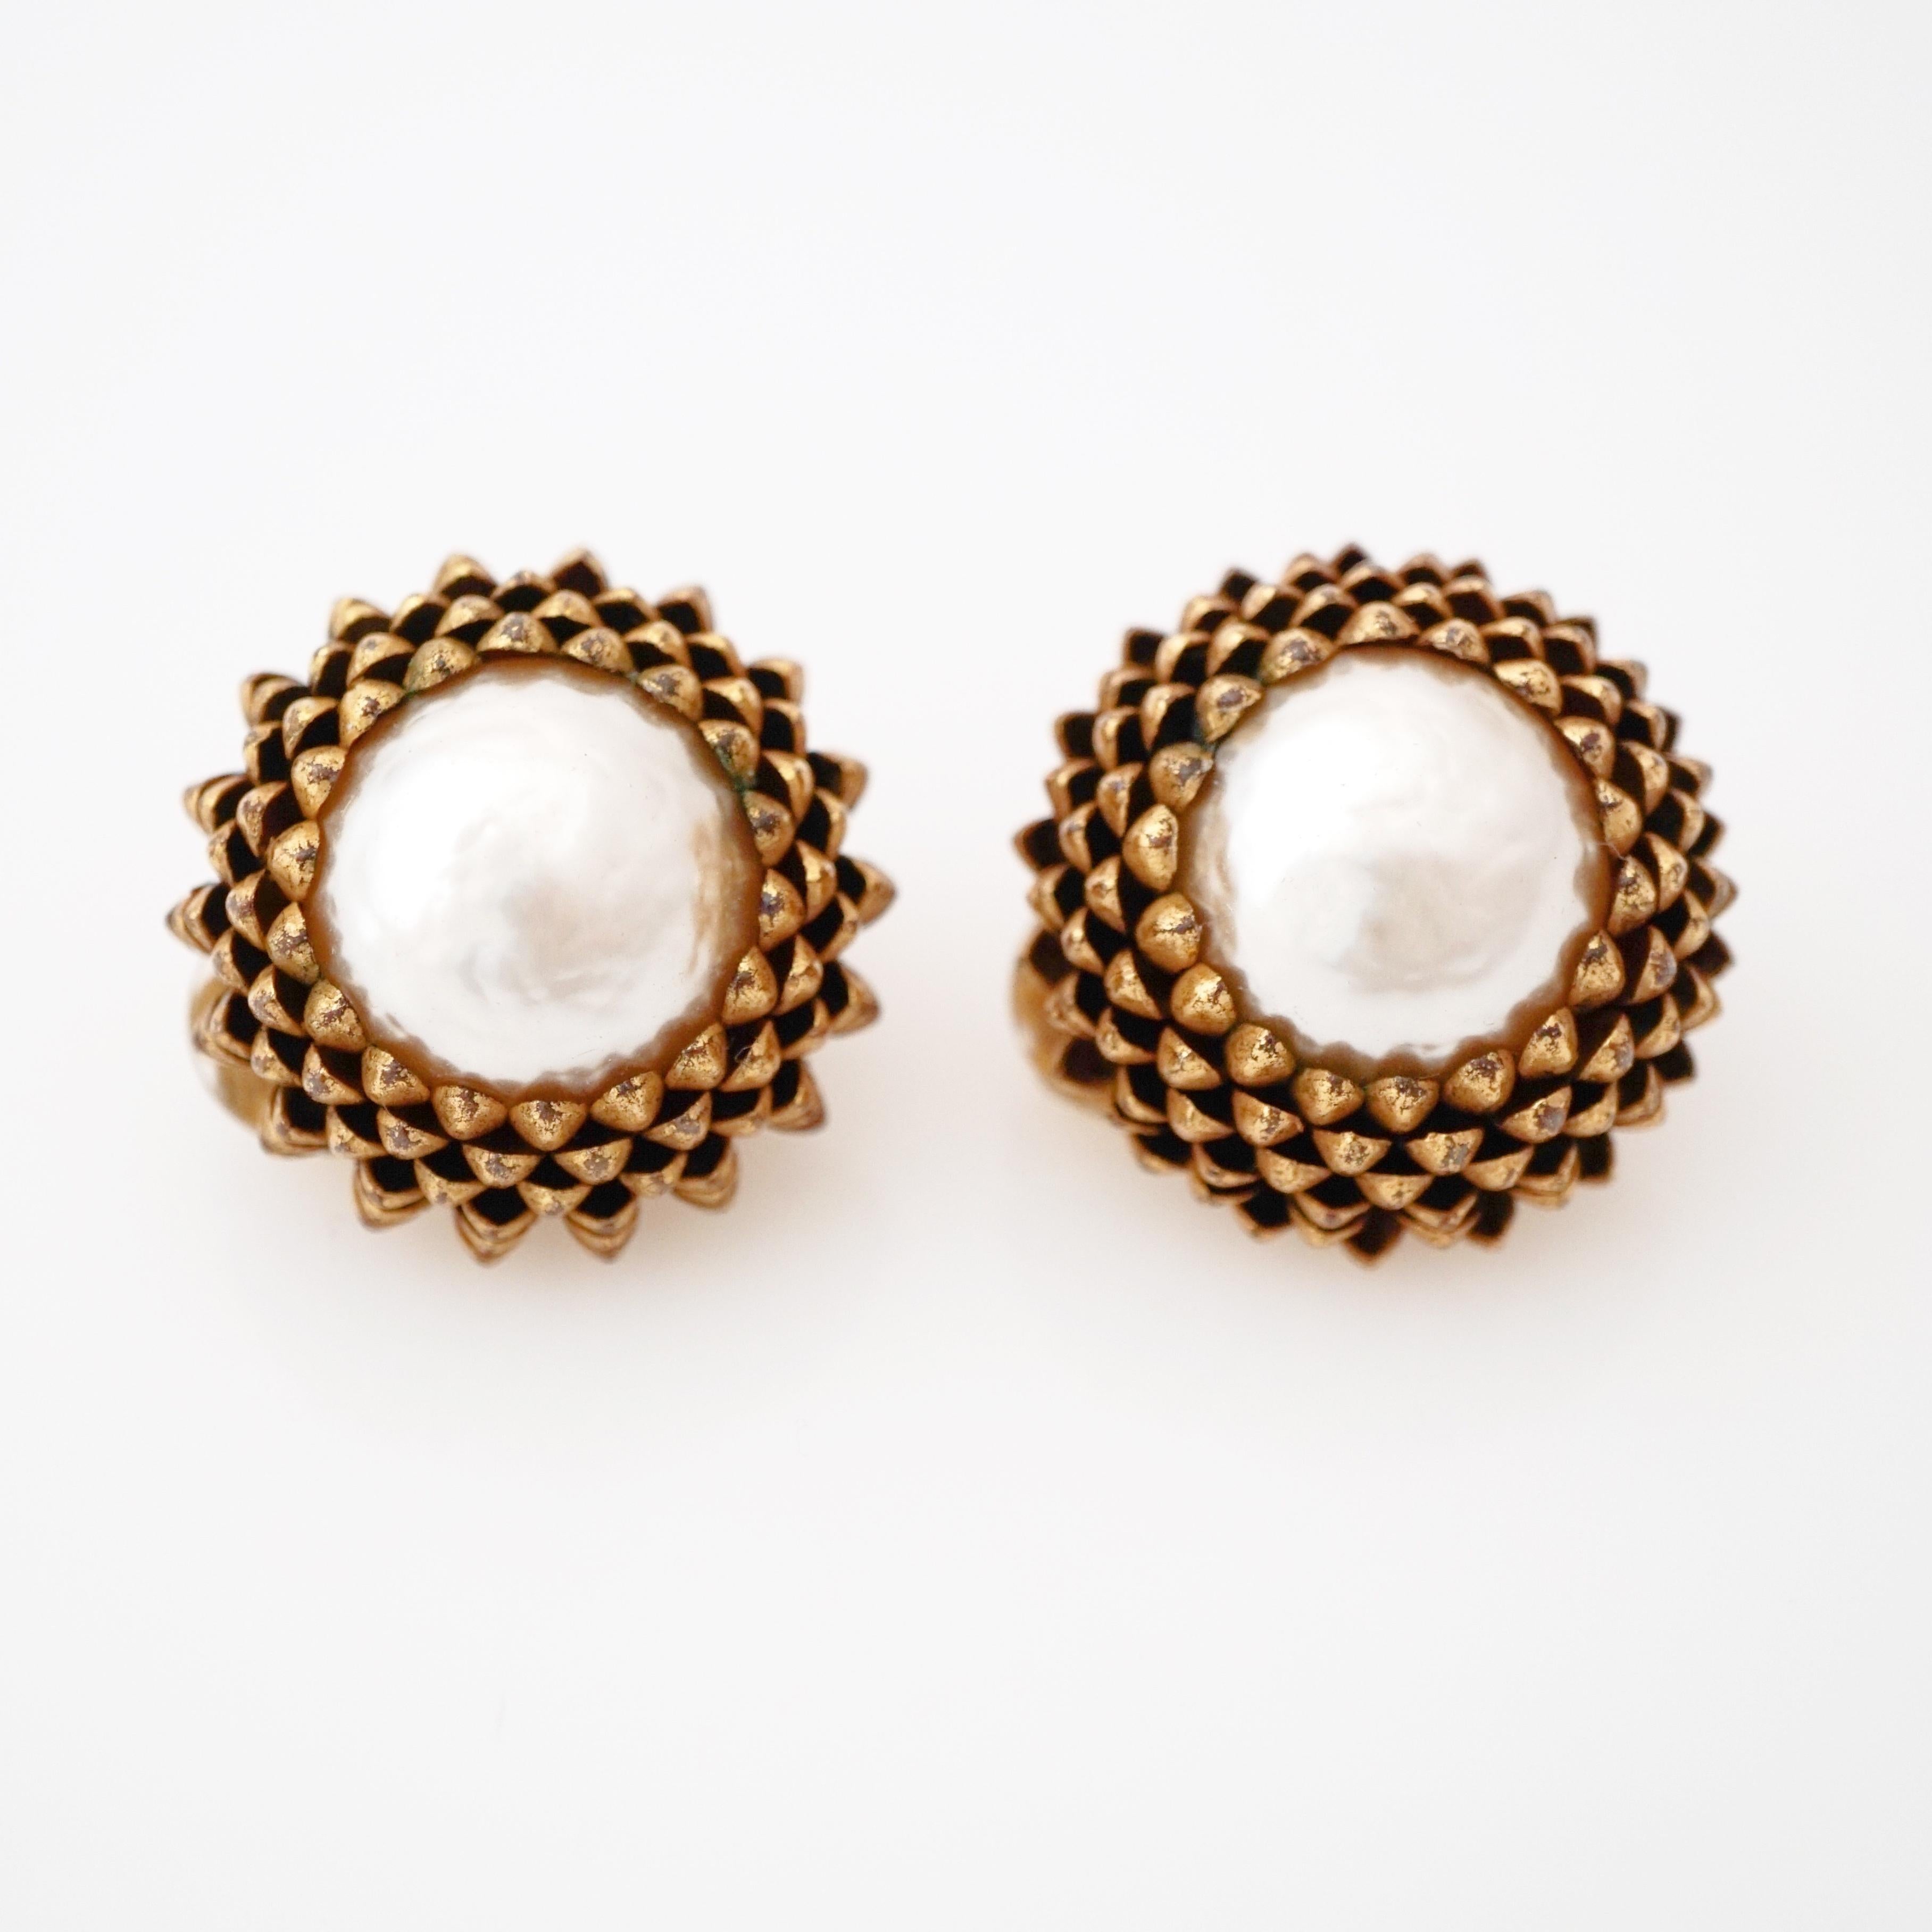 - Vintage item

- Collectible costume jewelry piece from the mid-century

- Each earring measures 1